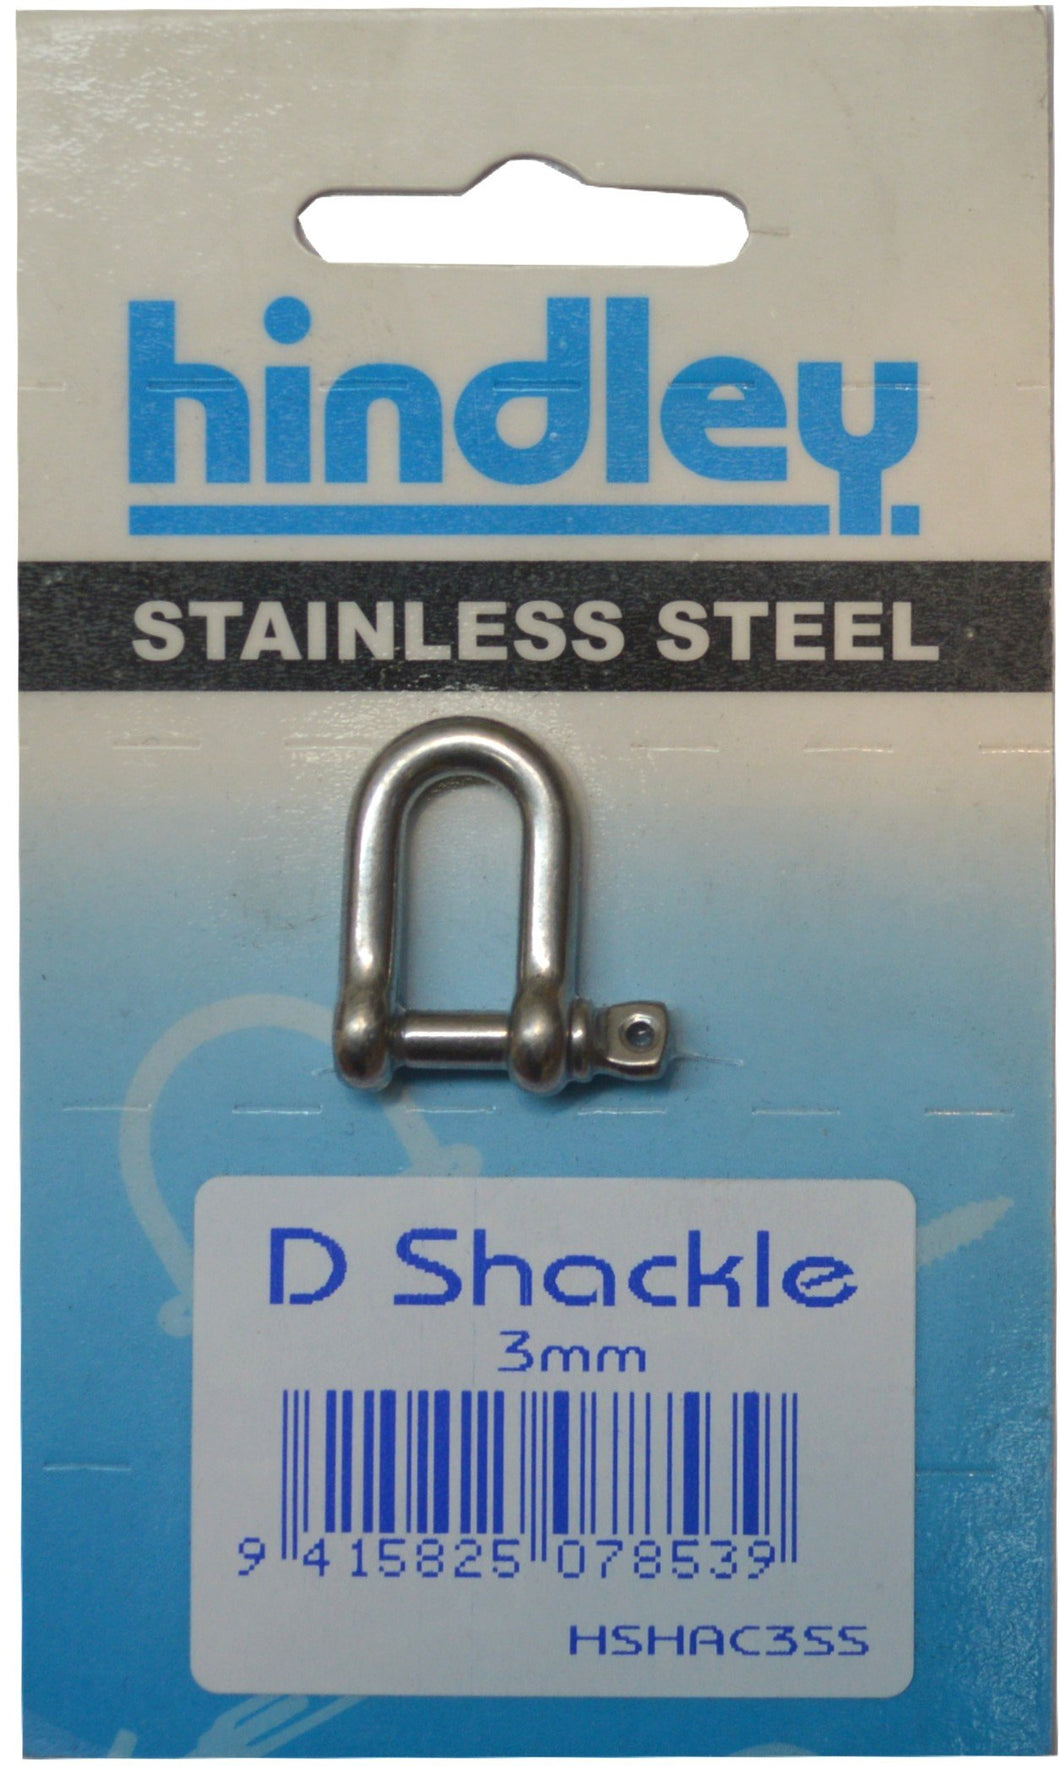 D Shackle Standard Stainless Steel 3mm Carded Hindley